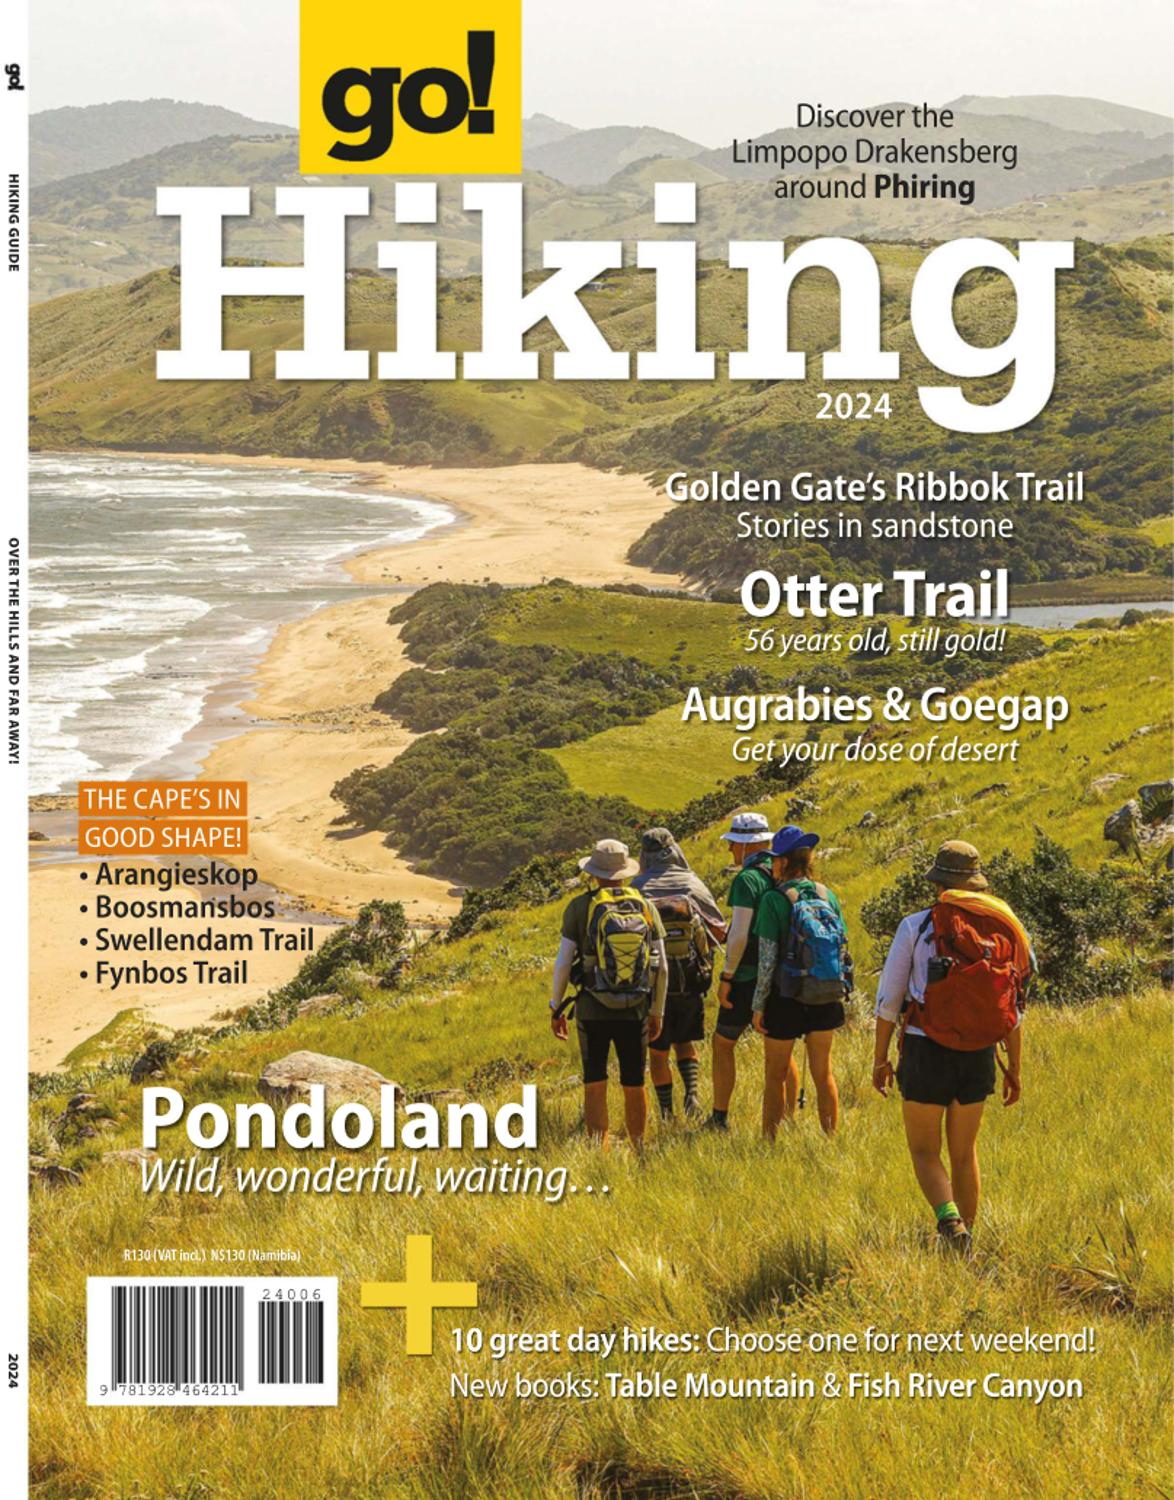 go! South Africa – Hiking Guide 2024